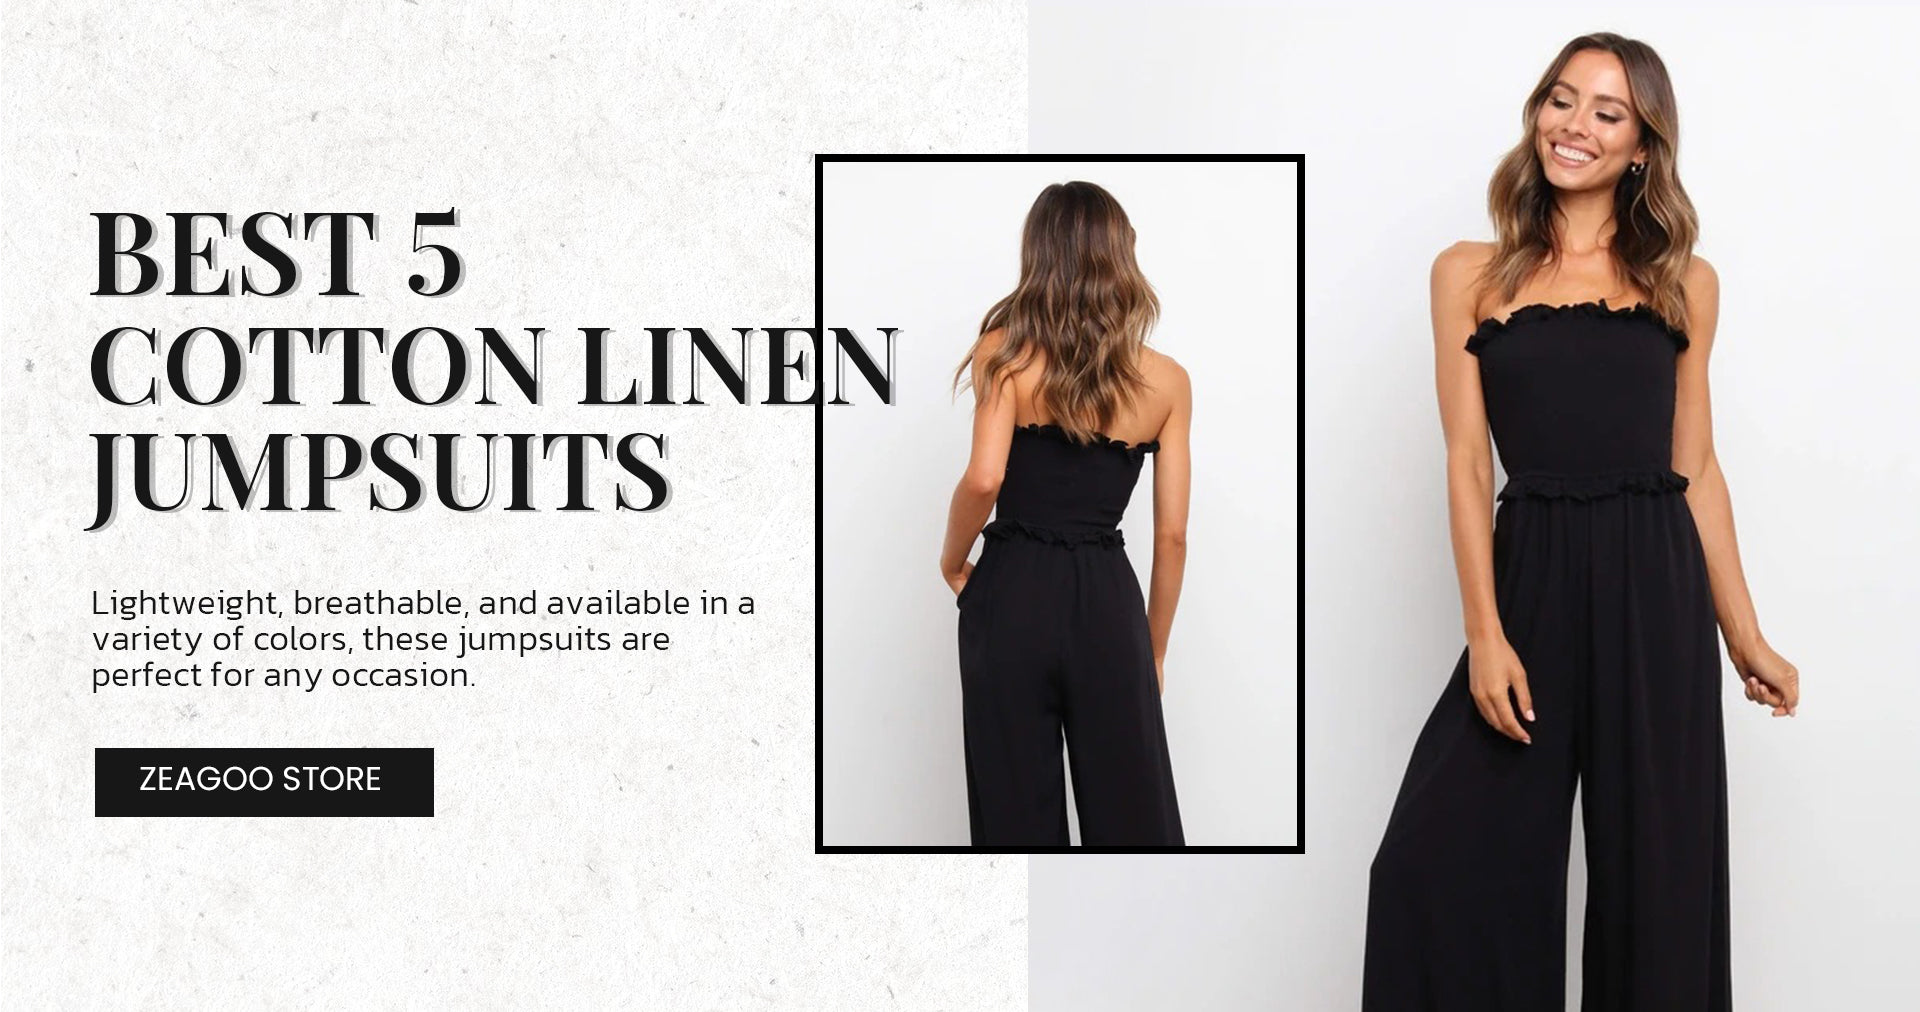 Best 5 Cotton Linen Jumpsuits for Any Occasion – Zeagoo